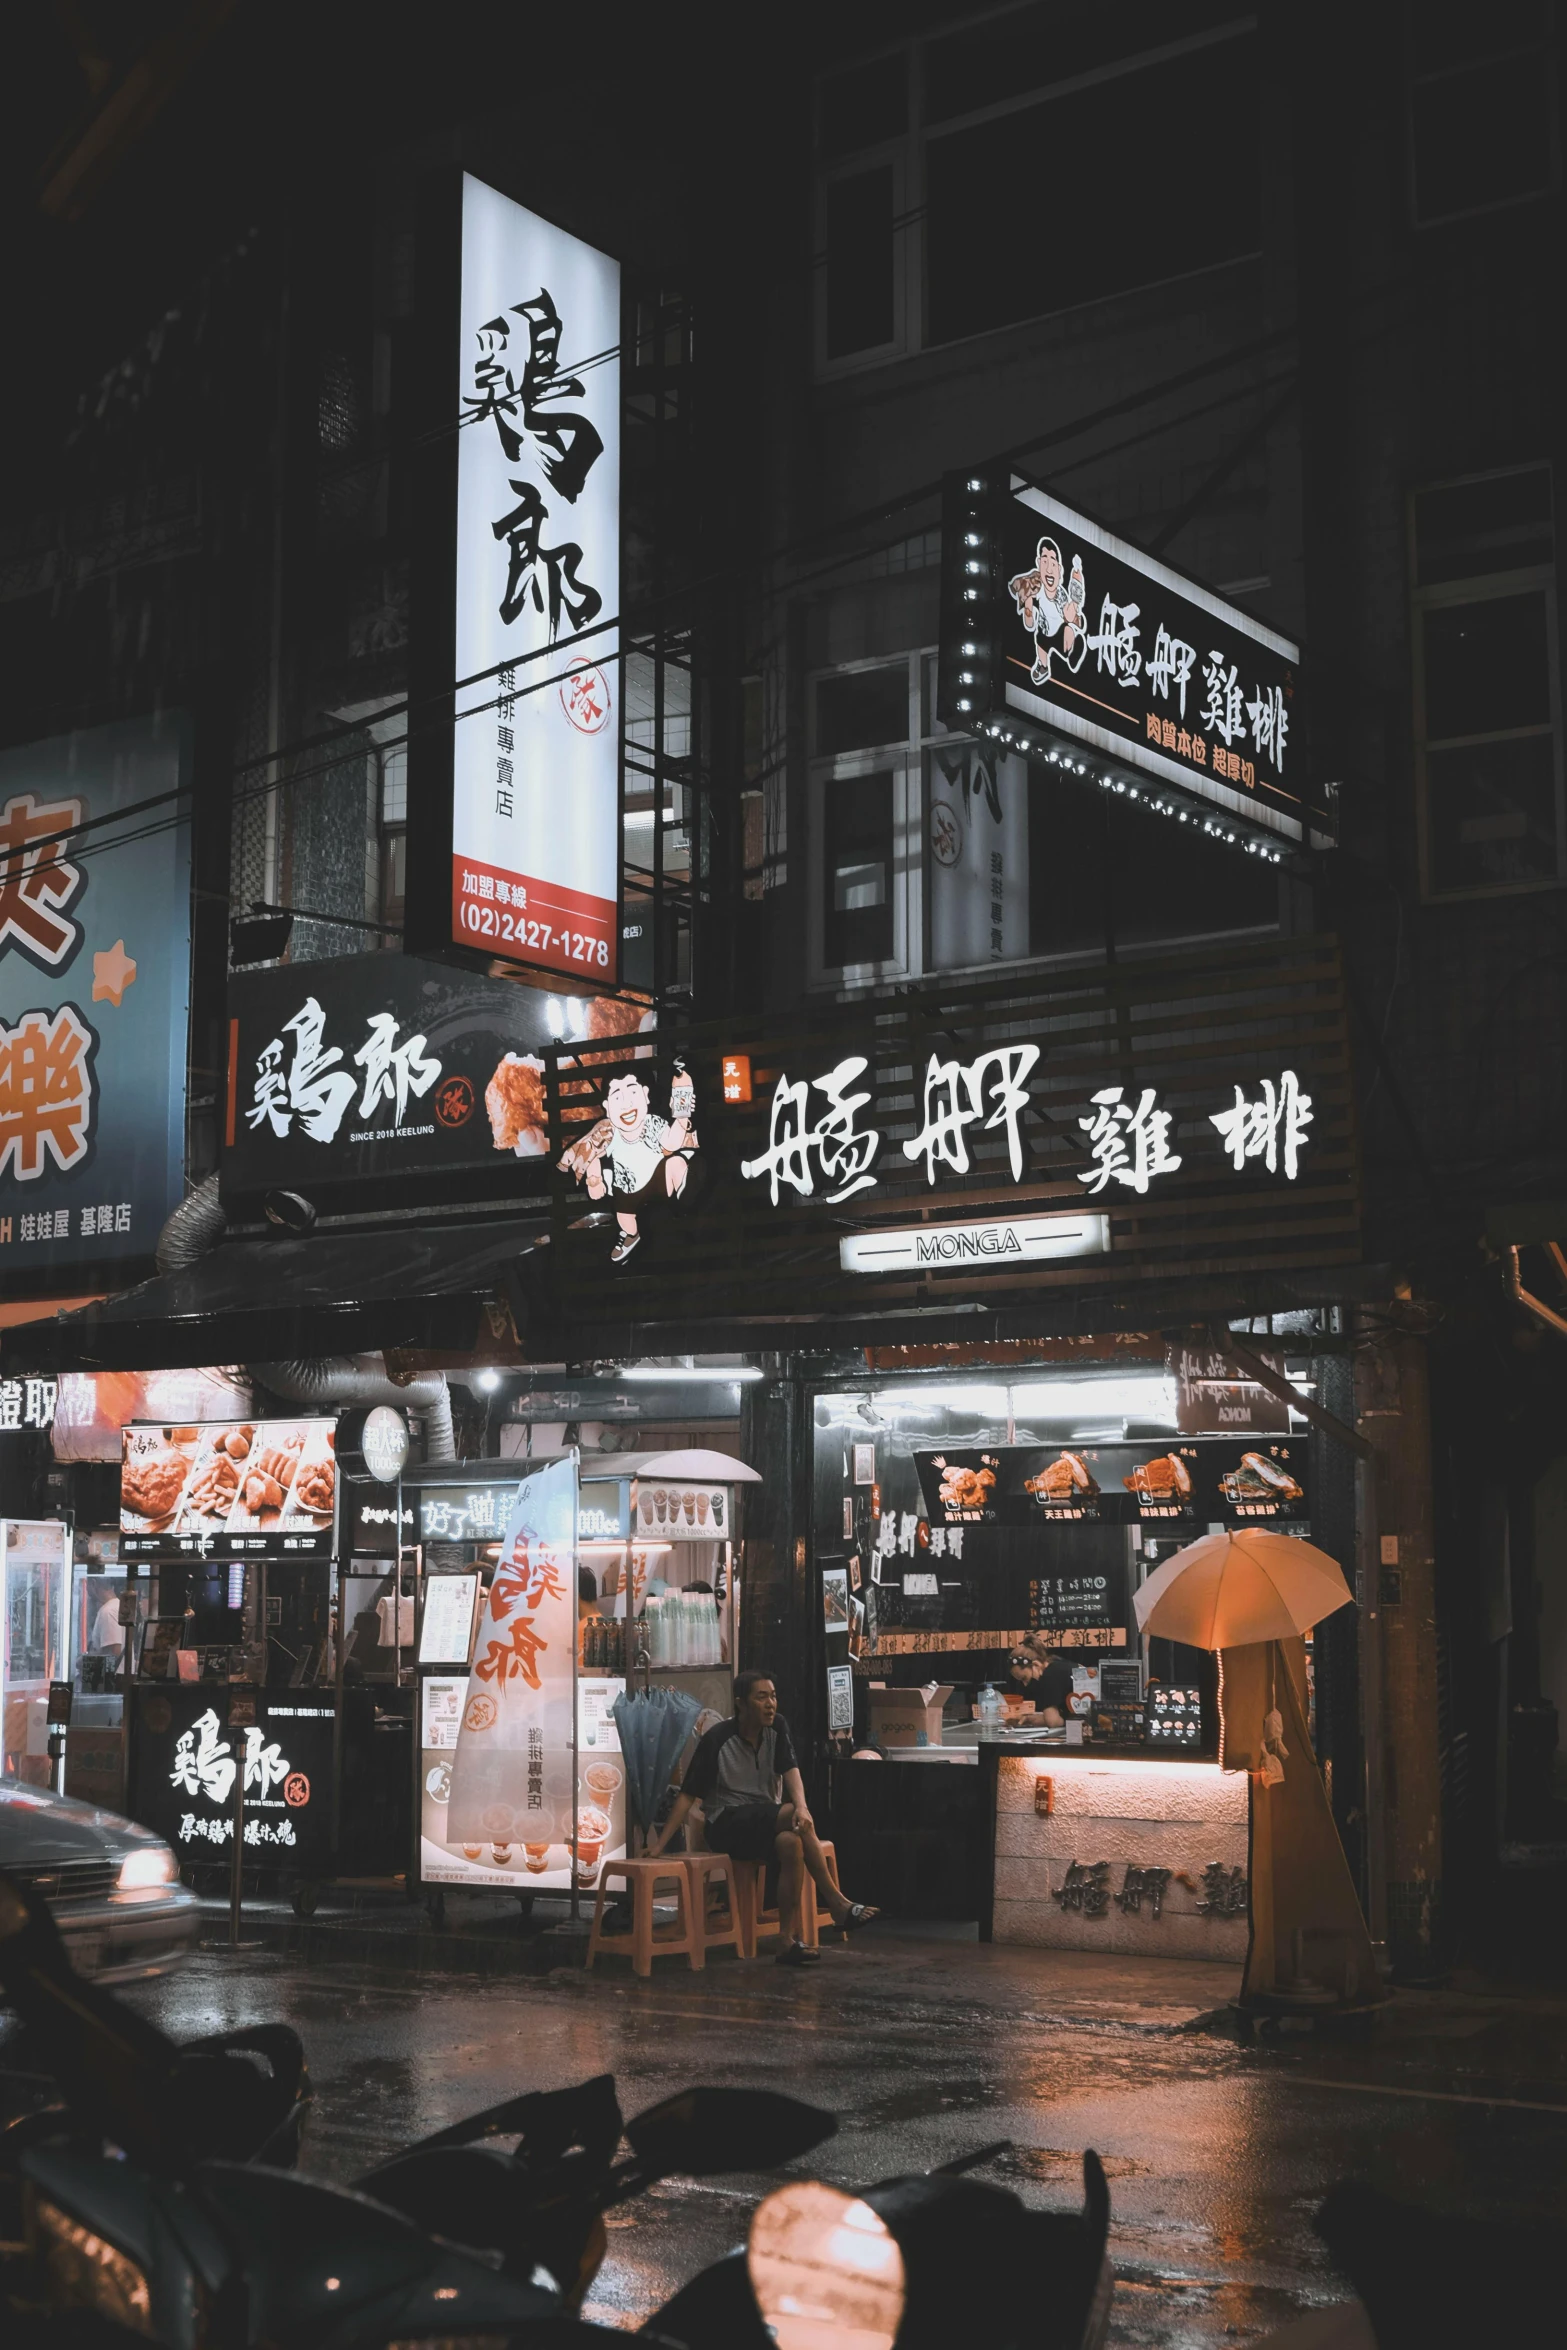 a couple of motorcycles parked in front of a building, inspired by Feng Zhu, pexels contest winner, lots of signs and shops, street at night, eating noodles, gif